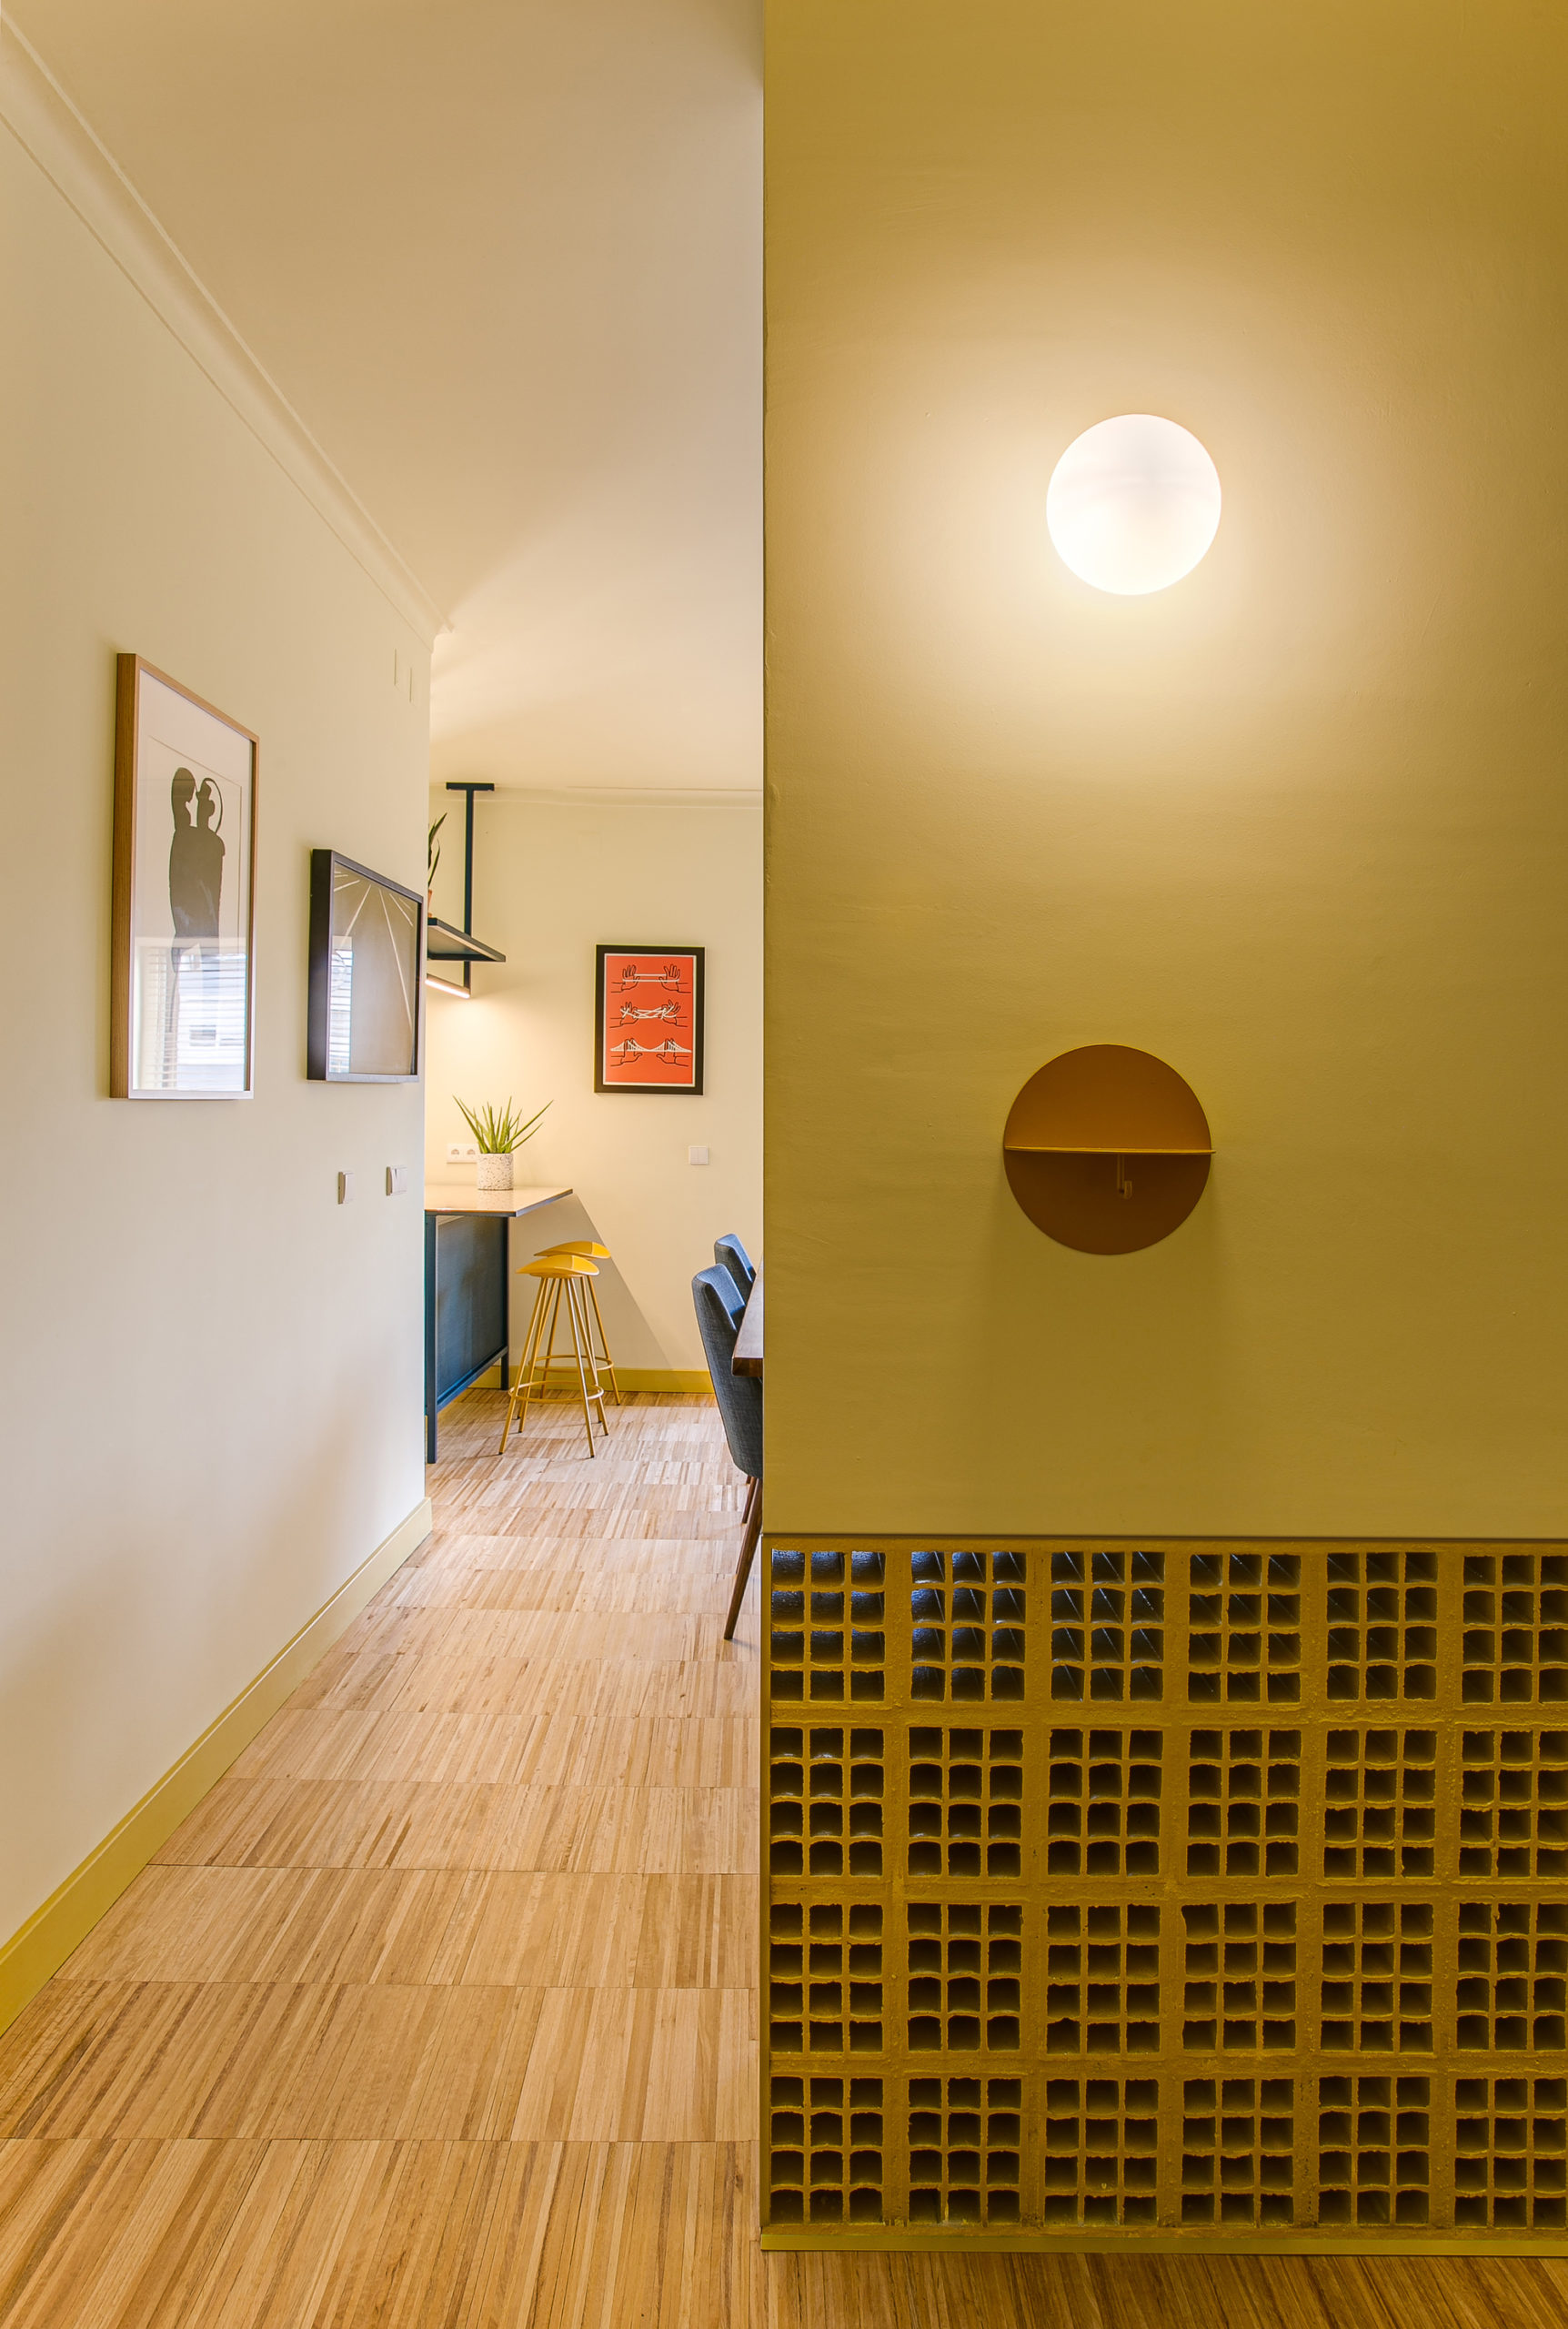 Revamped interior of old apartment in Portugal with wooden floors and bright yellow walls